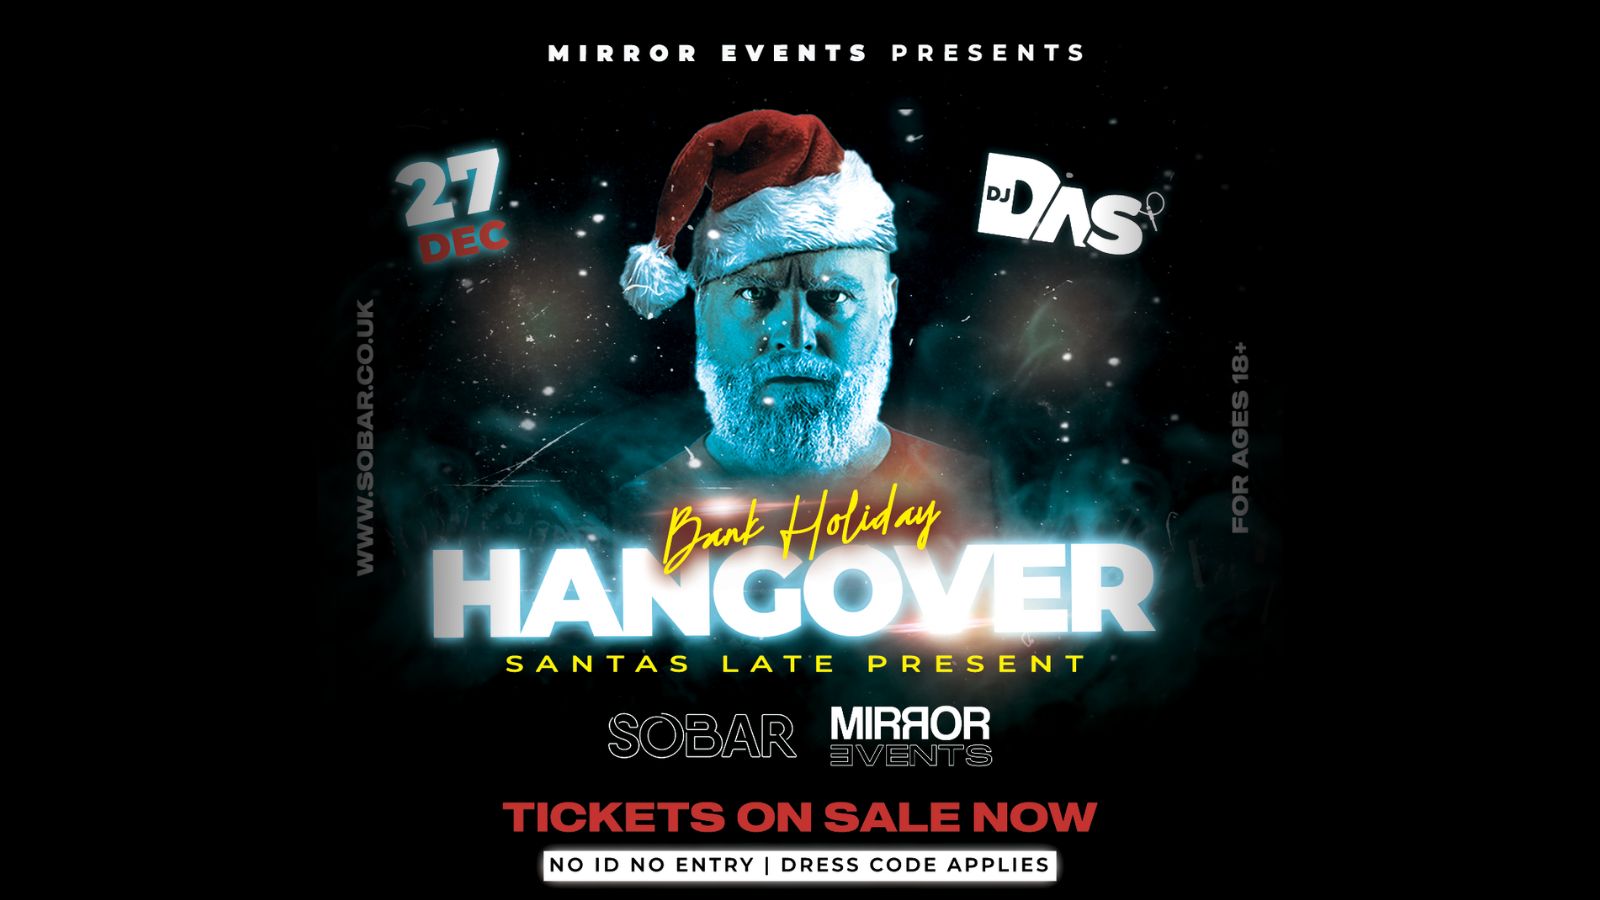 MIRROR EVENTS Presents “Hangover, Santa’s Late Present” Bank Holiday Special